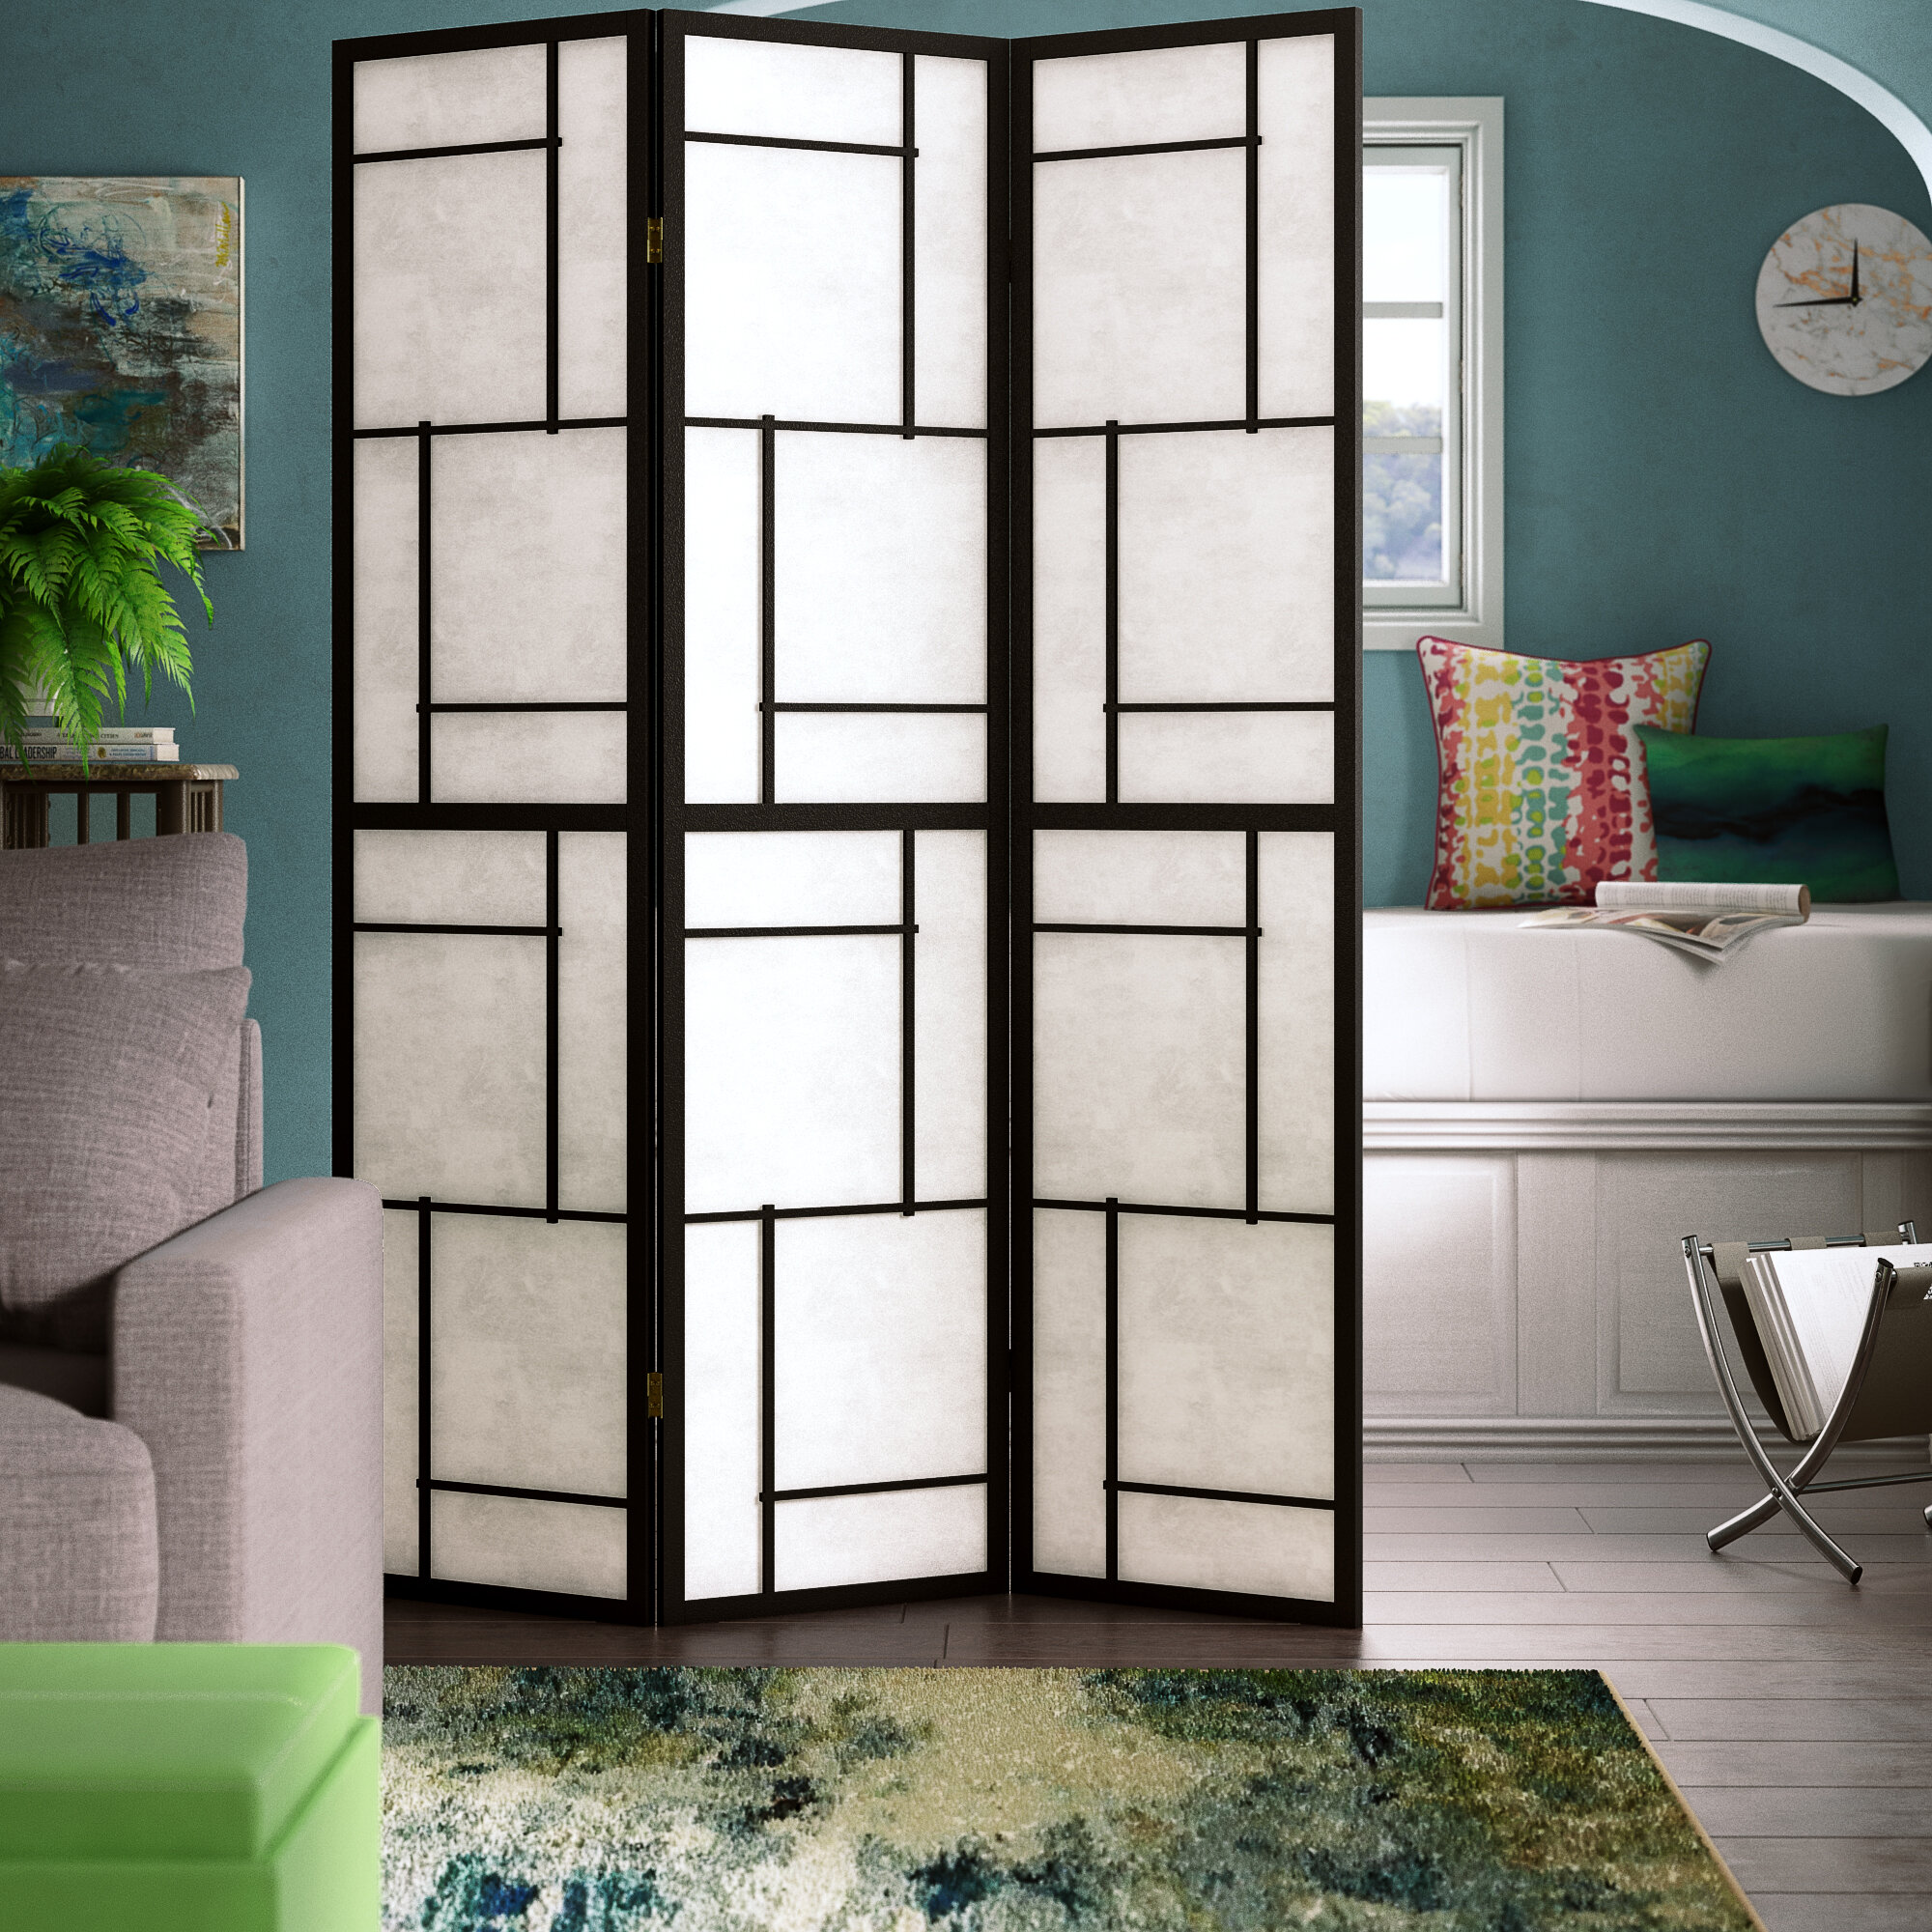 Details about   Photo Room Divider Folding Screen Room Divider Spanish Wall Bagheria 180x160cm show original title Orchid 